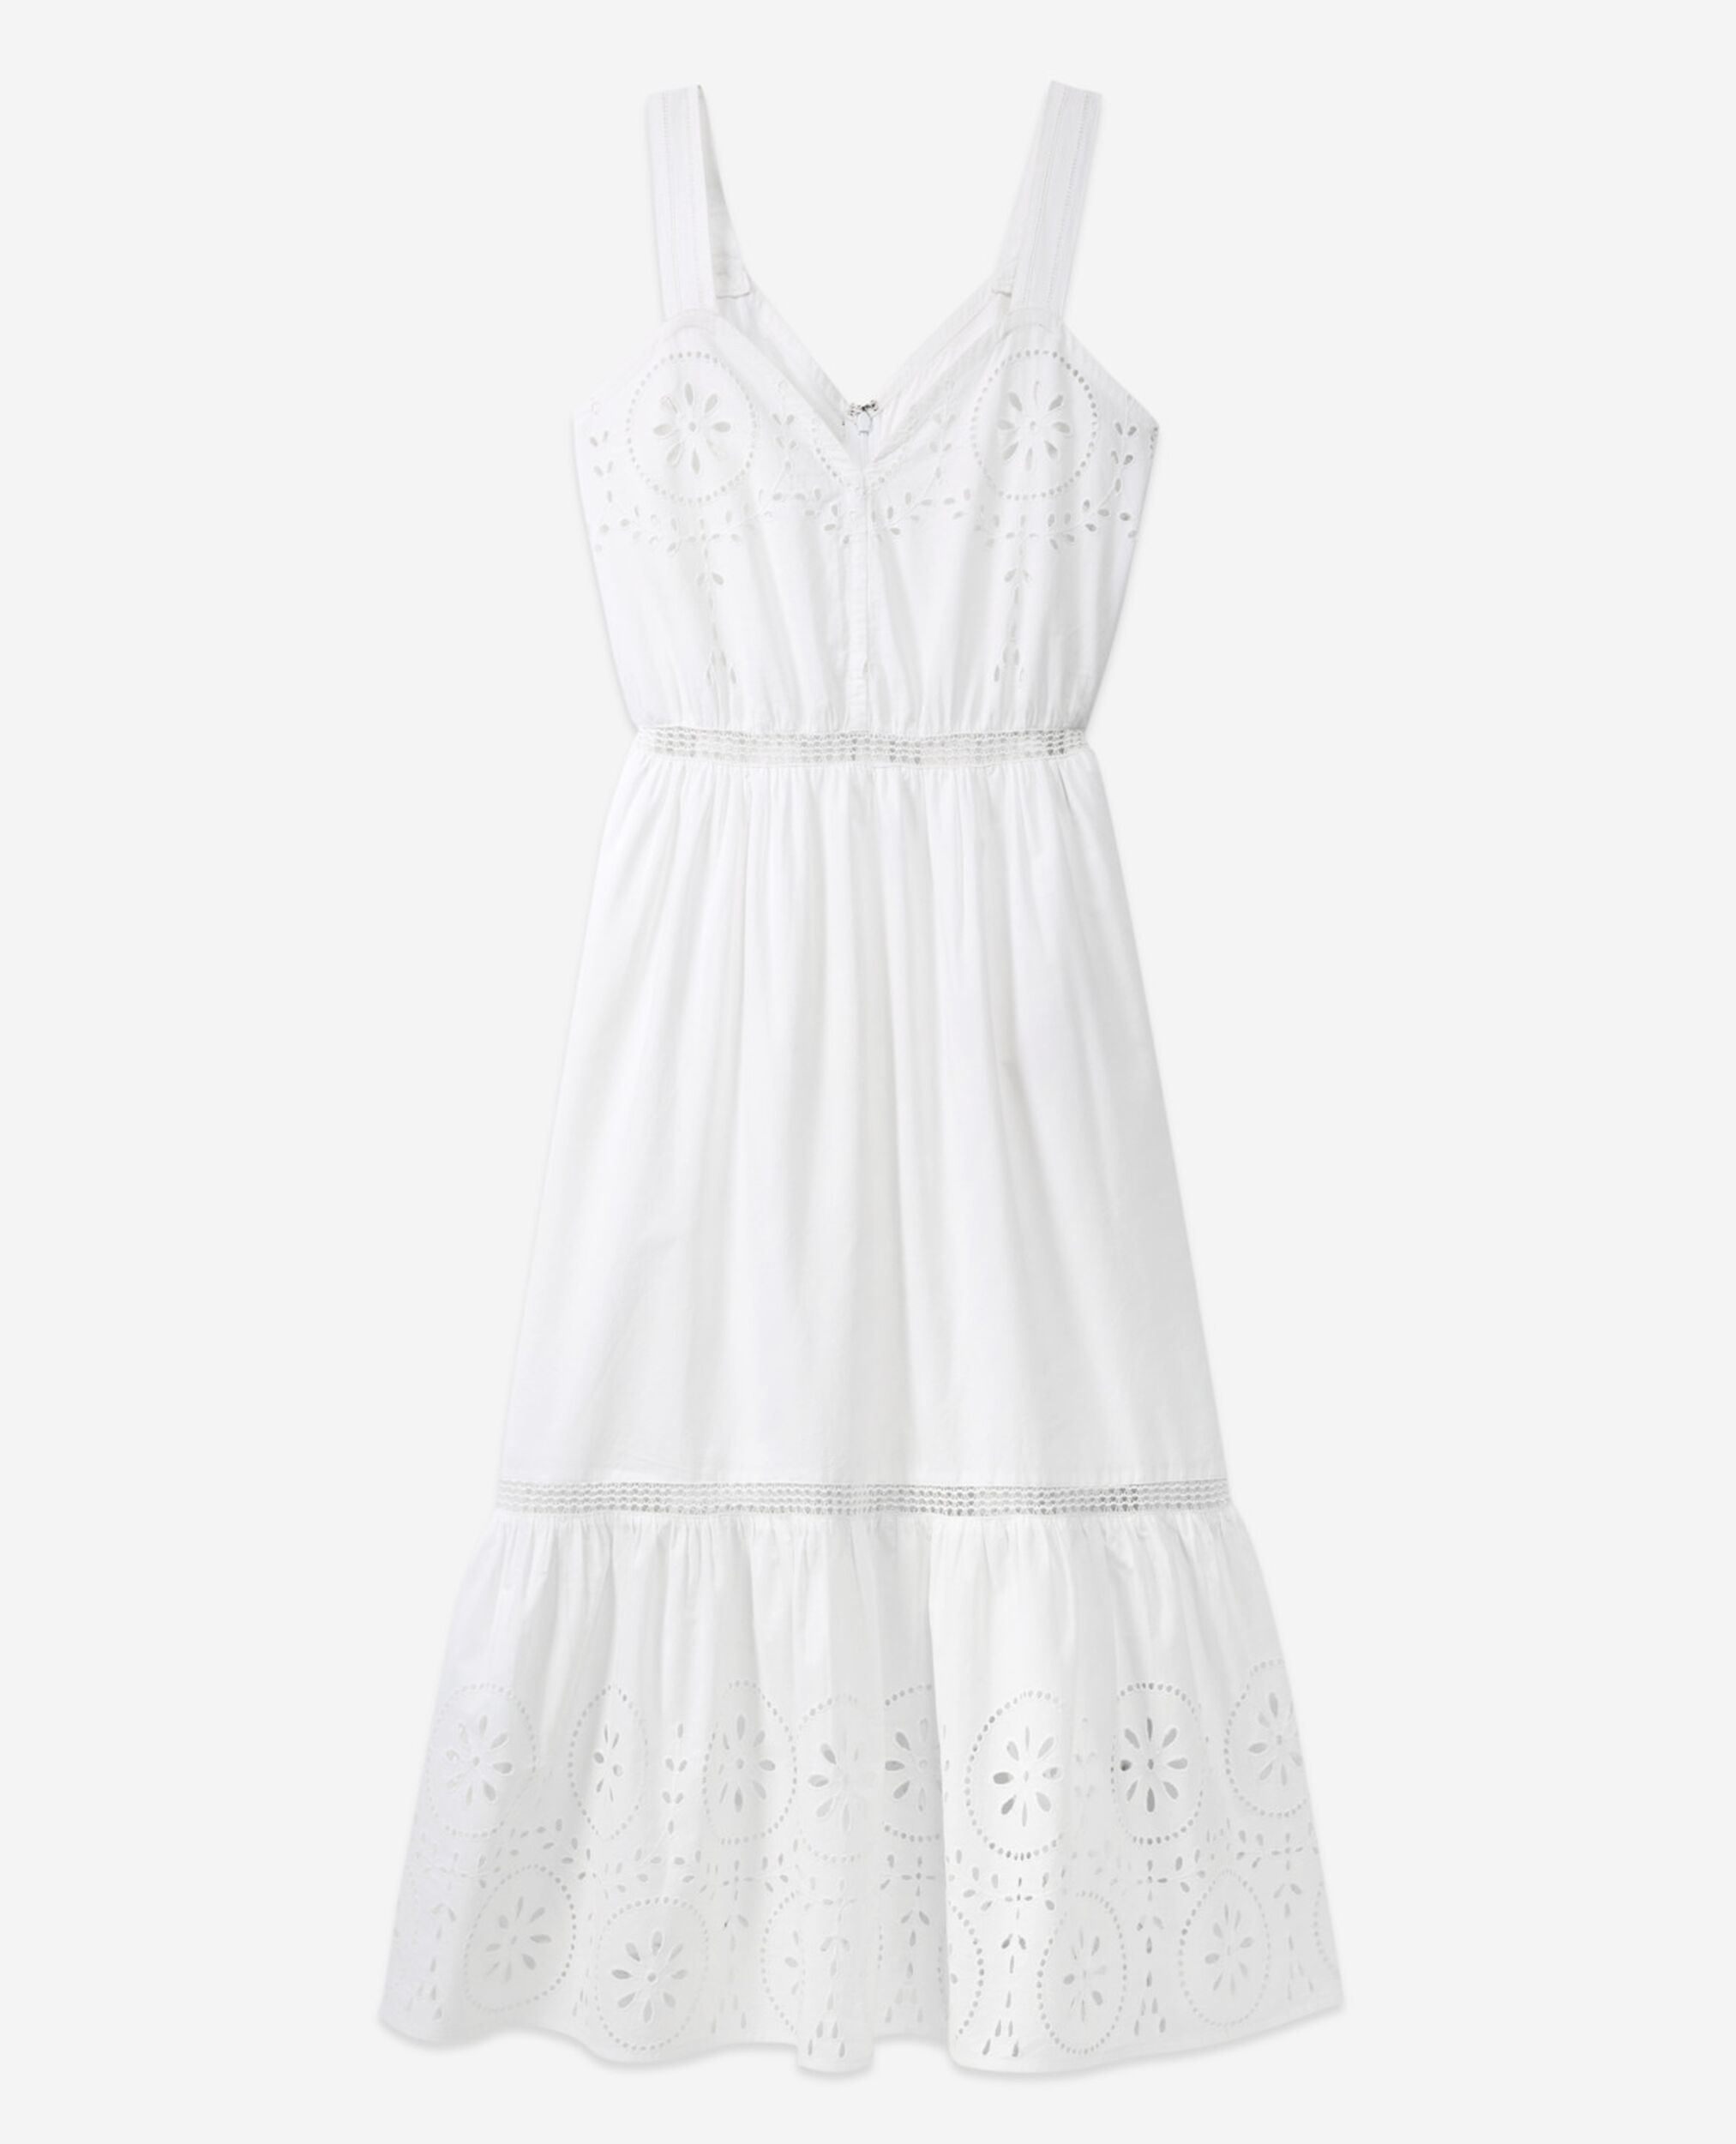 Robe dentelle blanche longue sans manches, WHITE, hi-res image number null